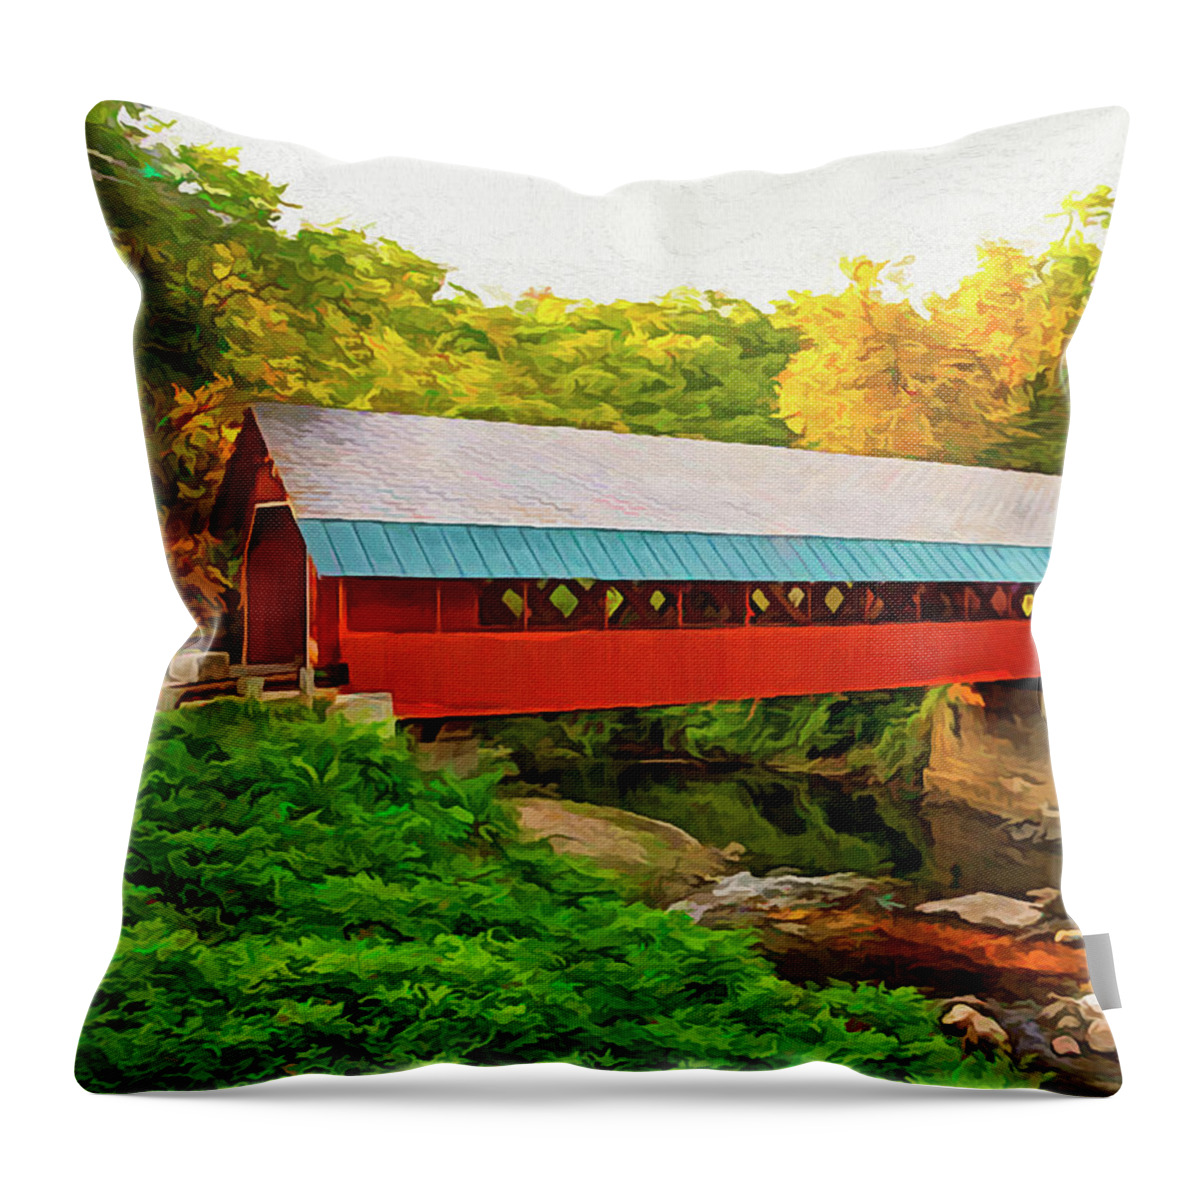 Covered Bridge Throw Pillow featuring the digital art Red Covered Bridge by Walter Colvin